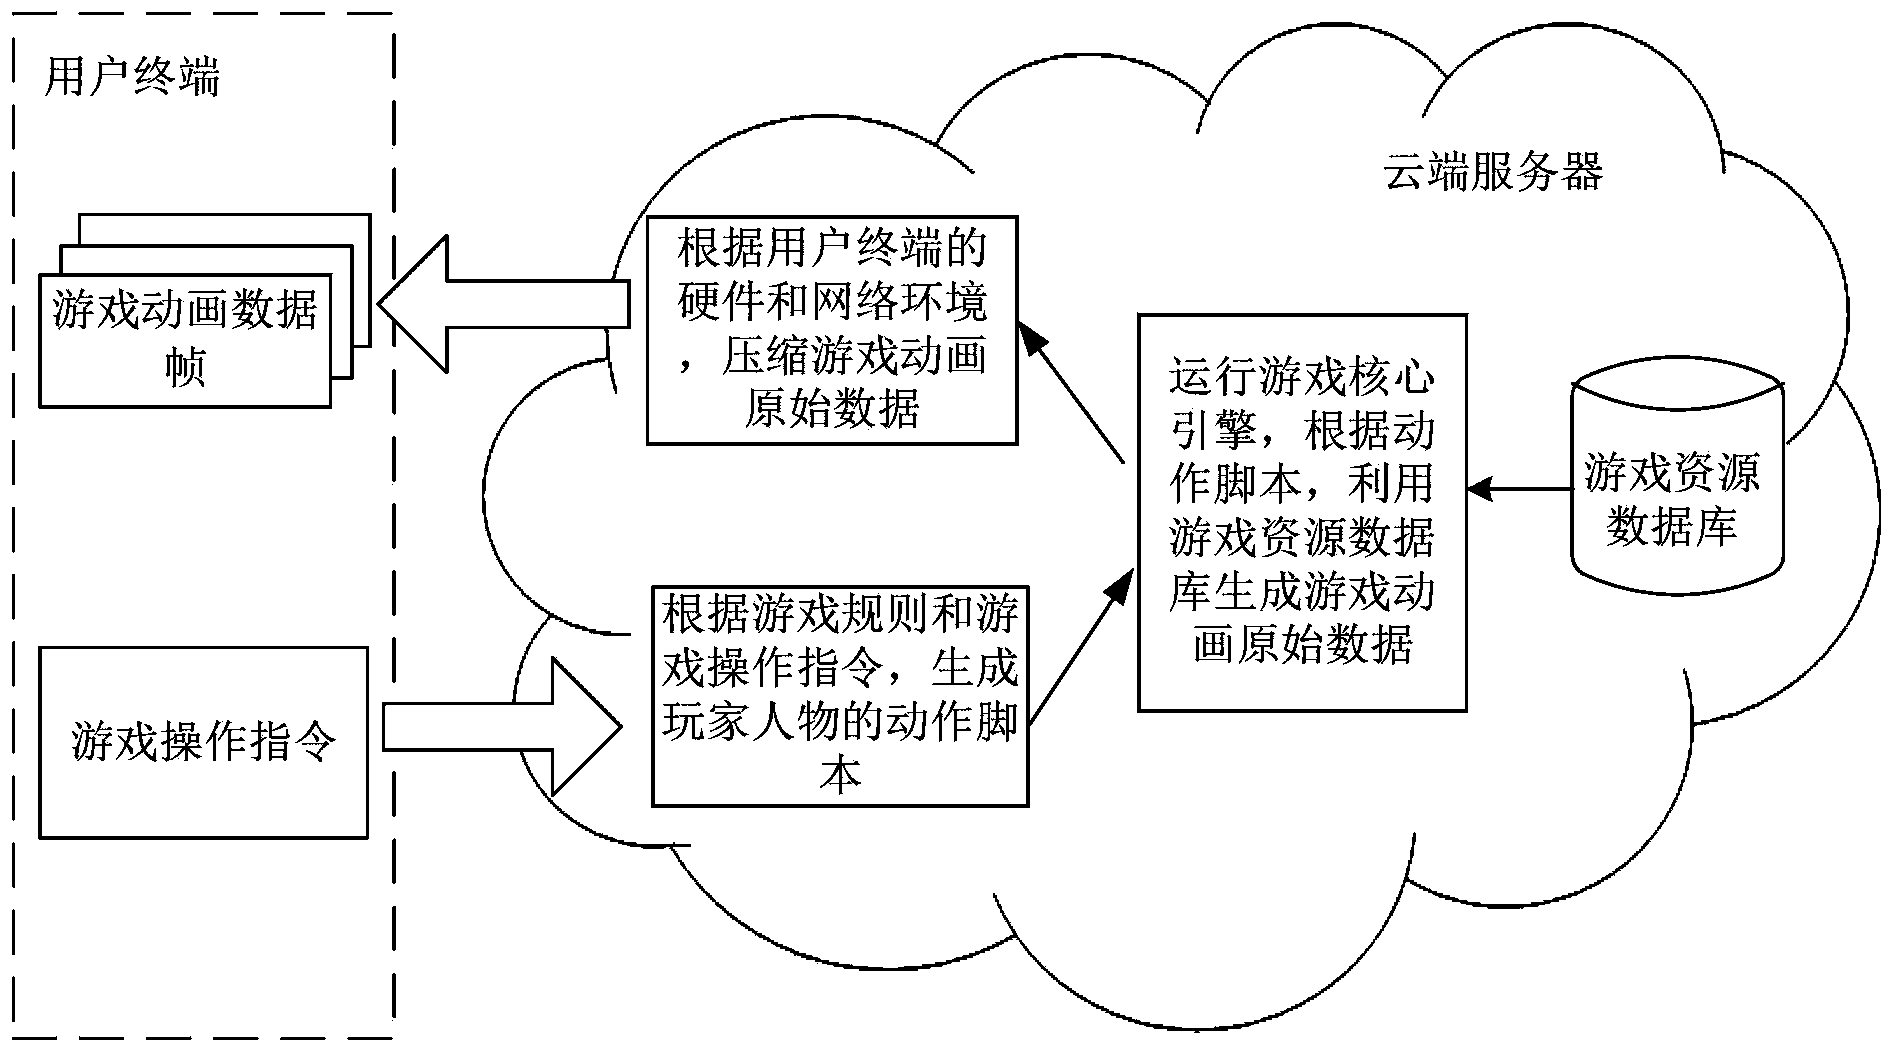 Application data processing method, device and system